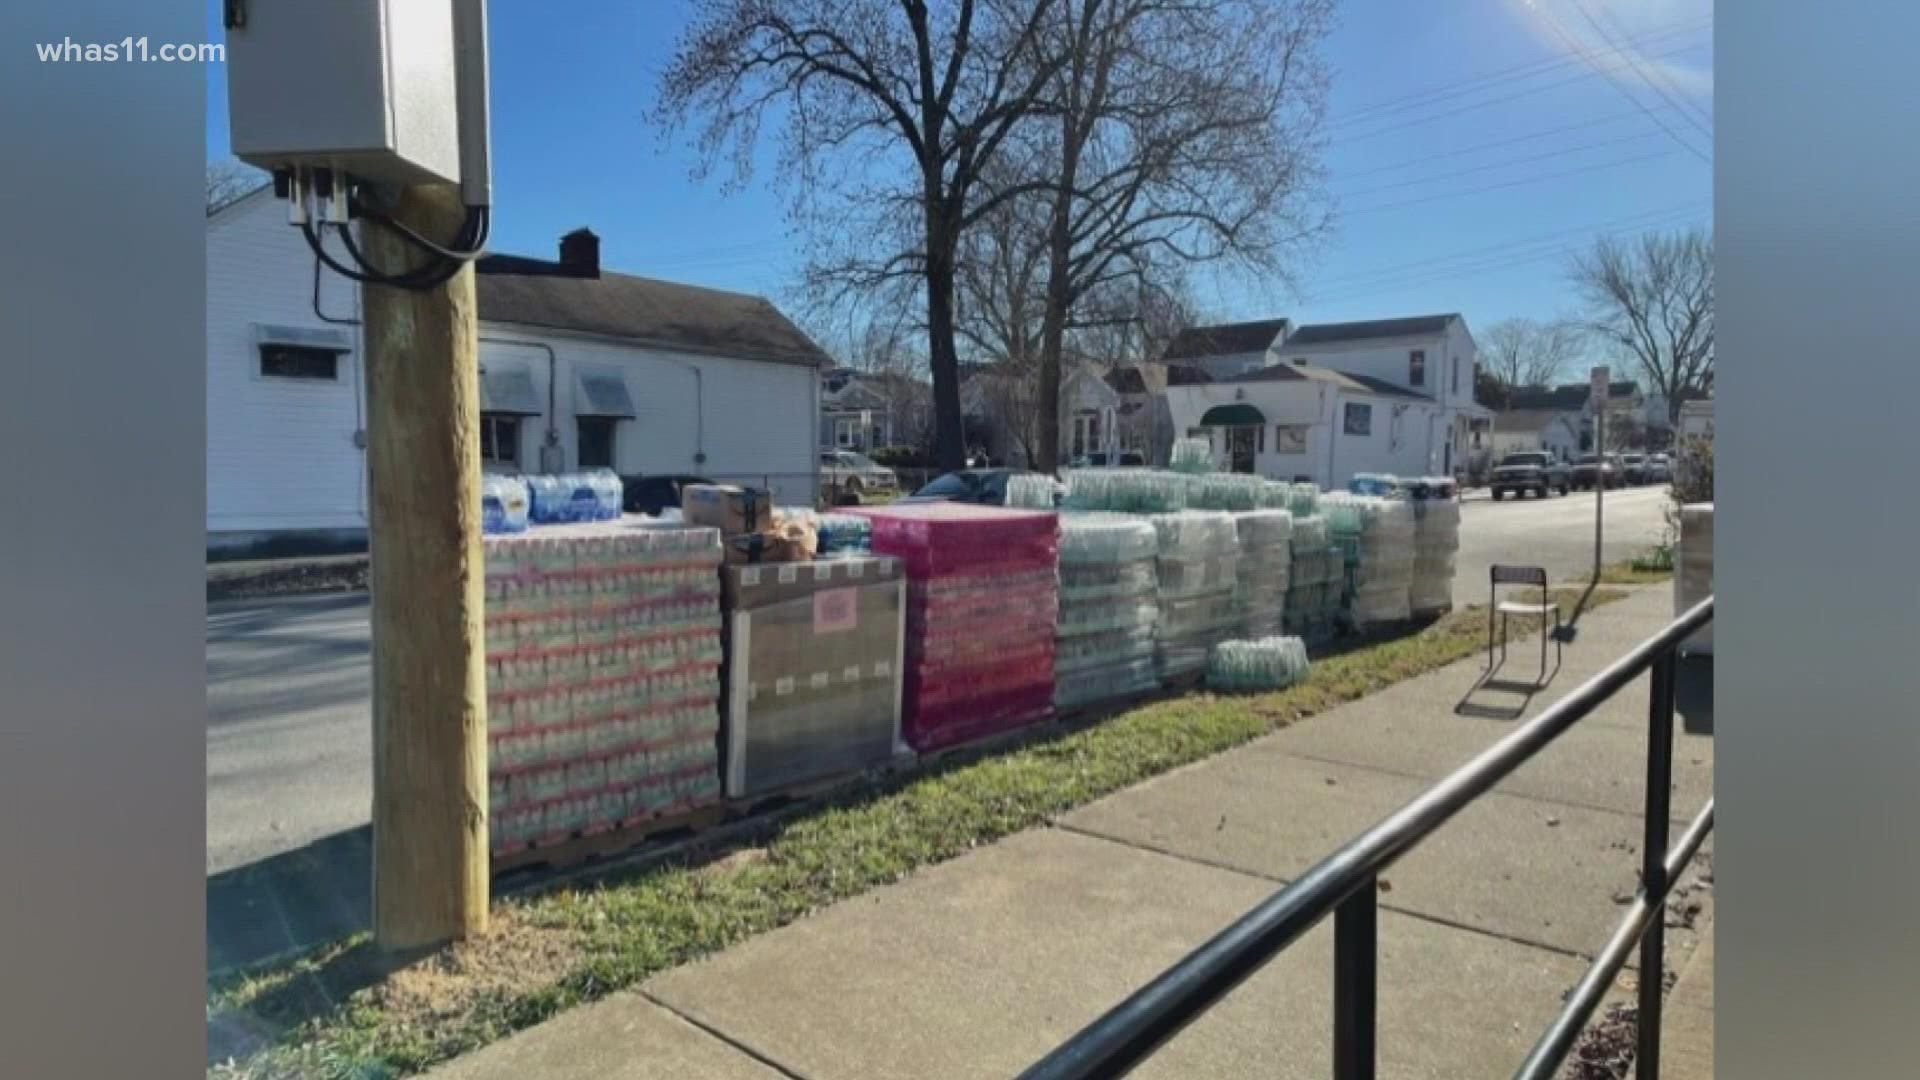 Businesses in Louisville asking for the community's help to give food and supplies to those who lost everything in the western Kentucky tornadoes.